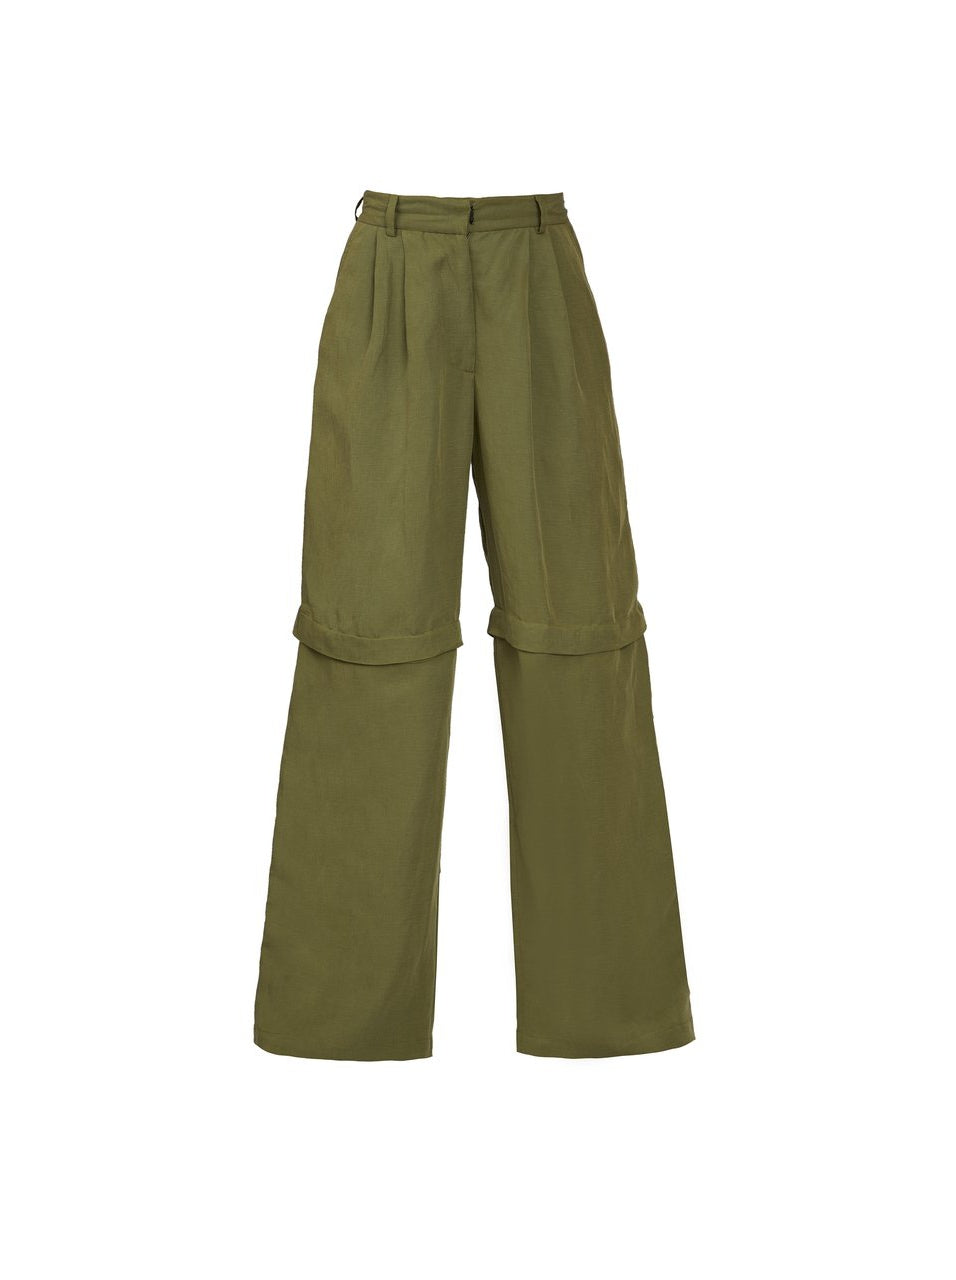 Modular trousers shorts khaki ethically made from sustainable material